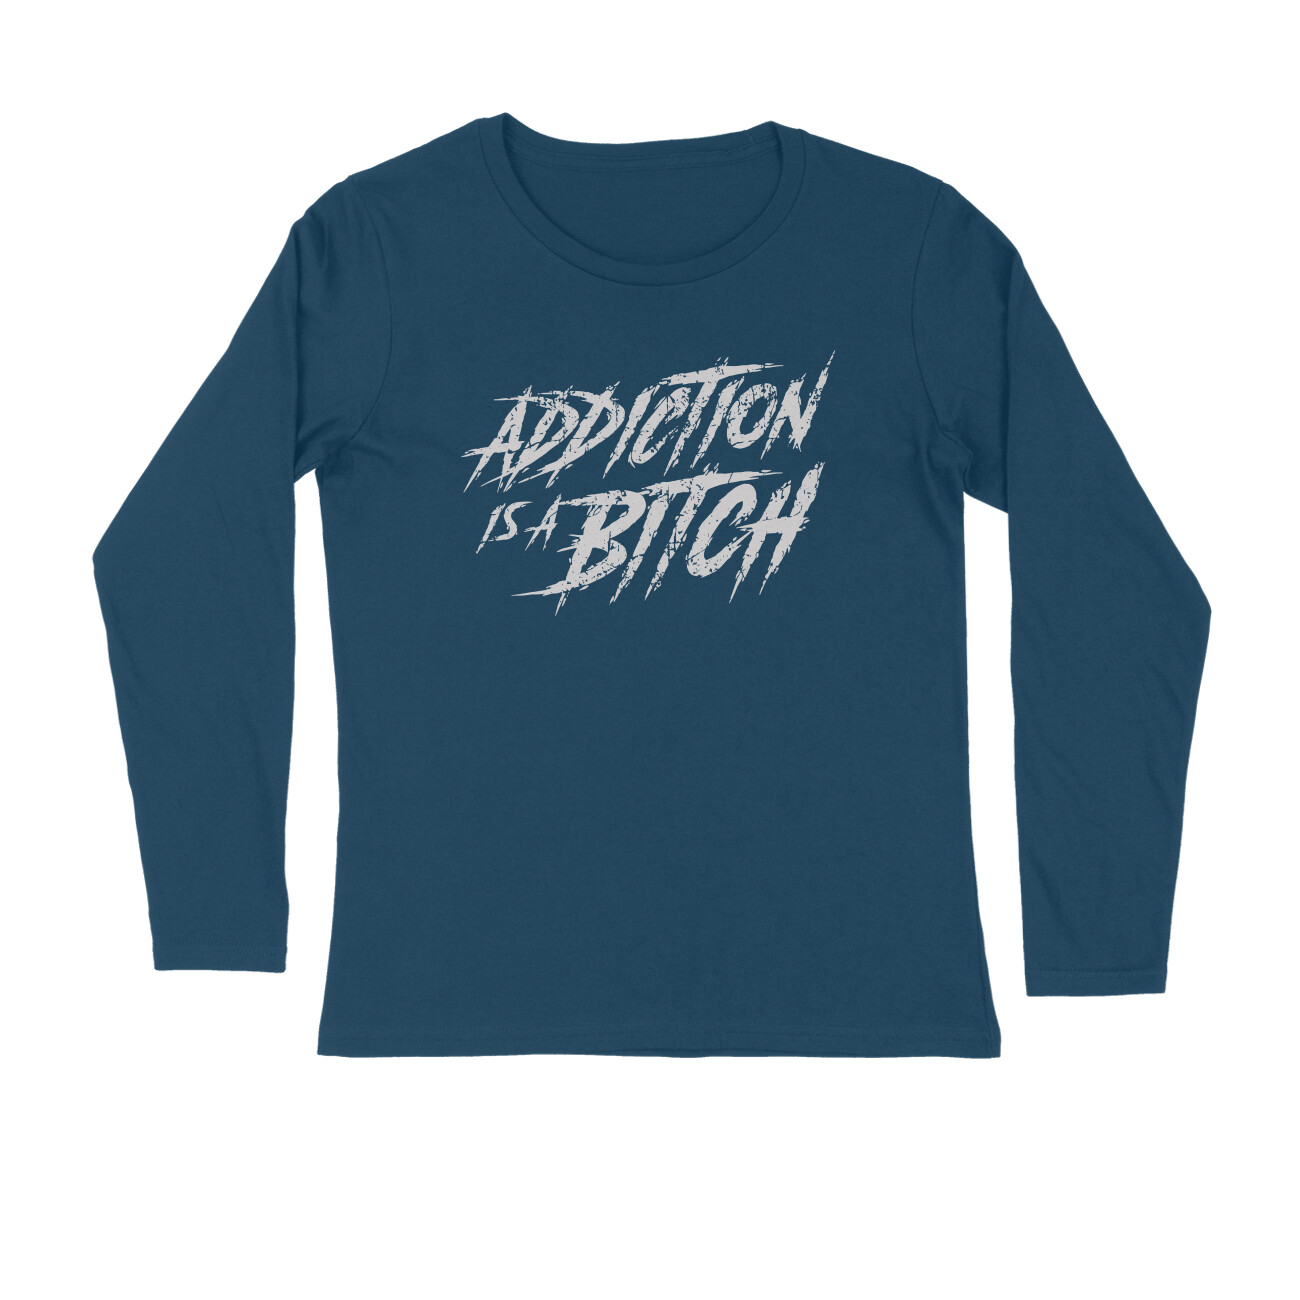 Addiction is a bitch, Funny T-shirt quotes and sayings - Manmarzee